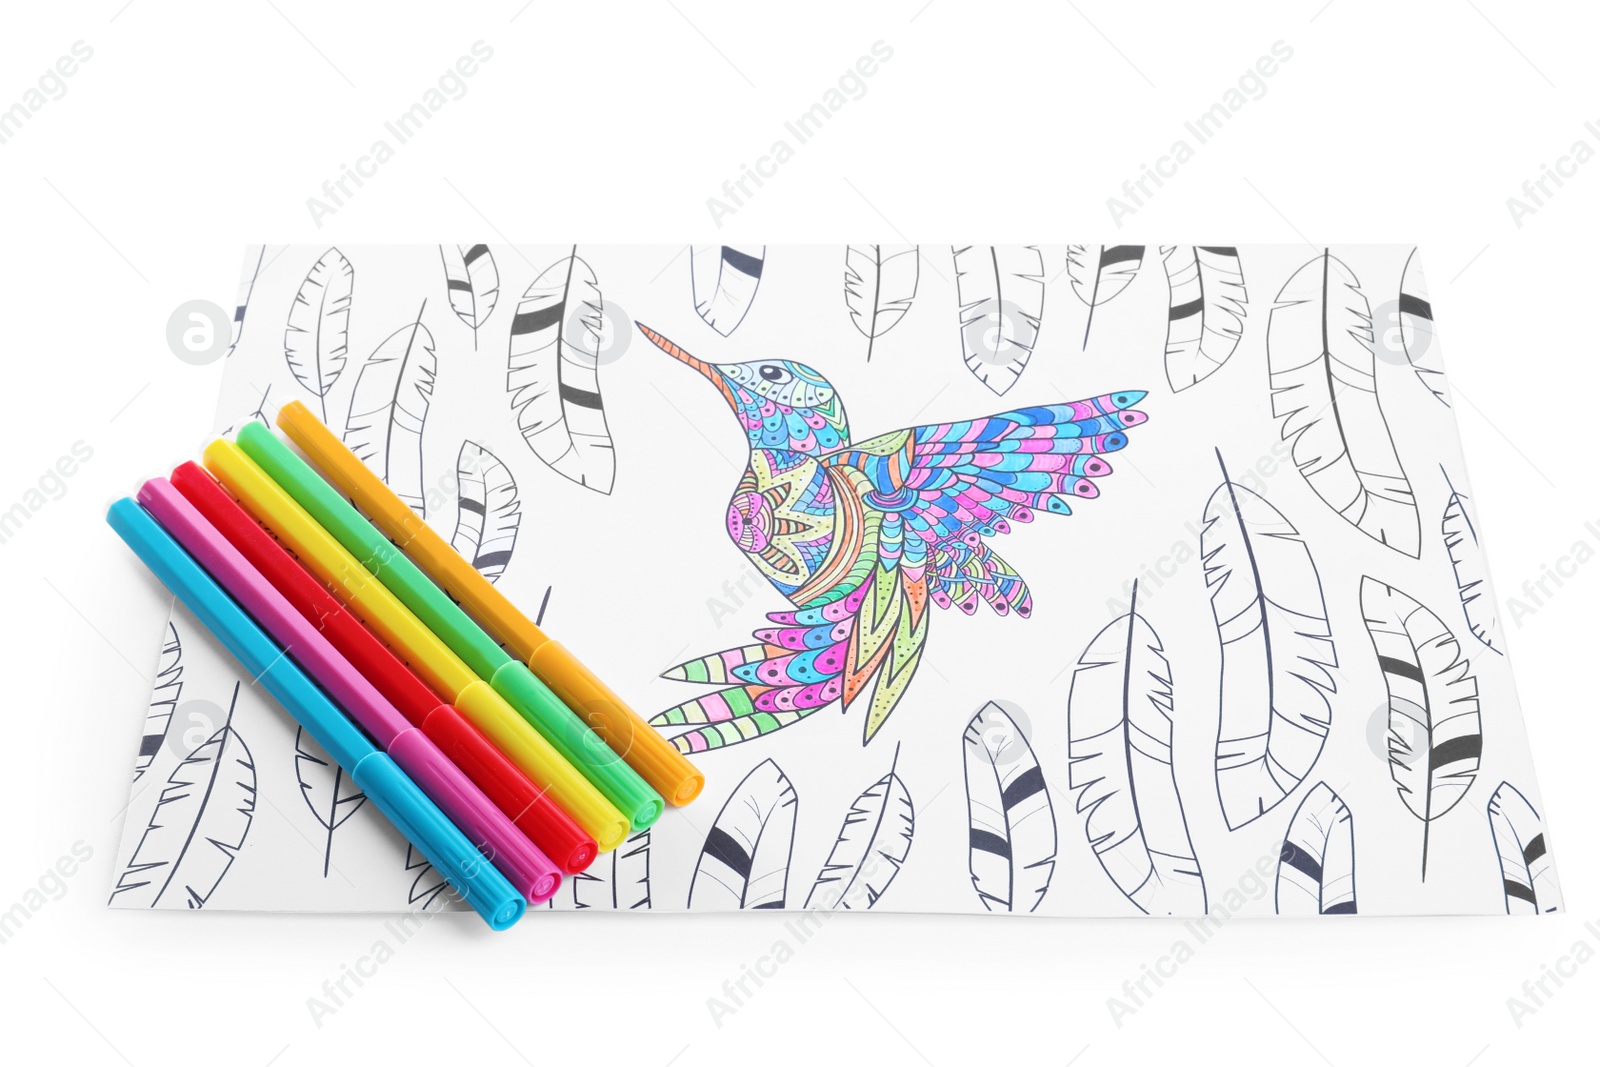 Photo of Antistress coloring page and felt tip pens on white background